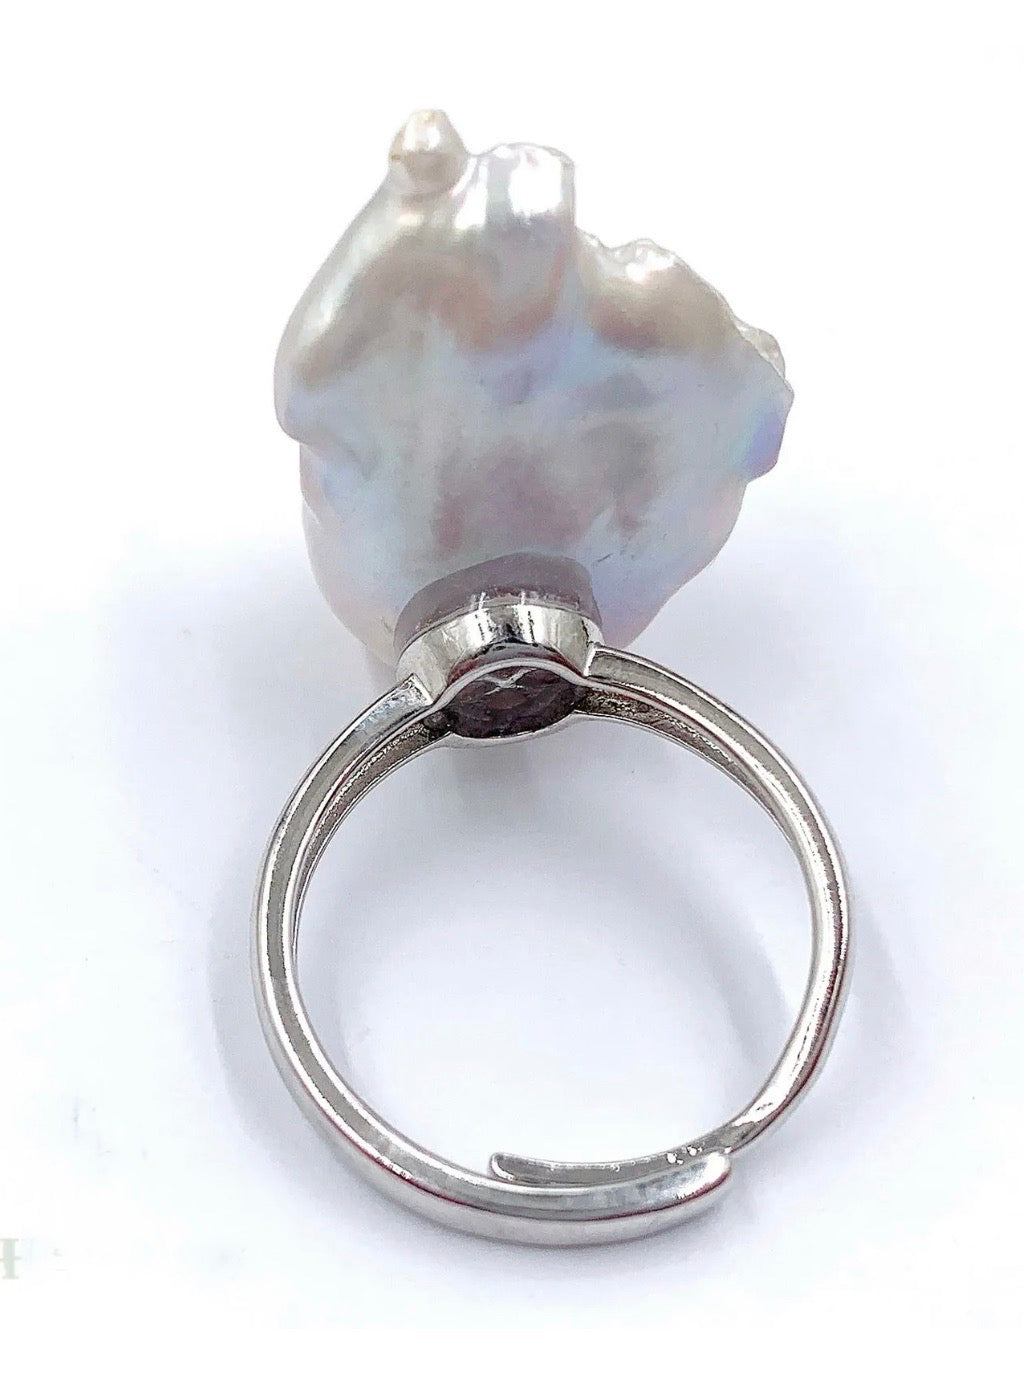 Freeform White Baroque Pearl Silver Adjustable Ring